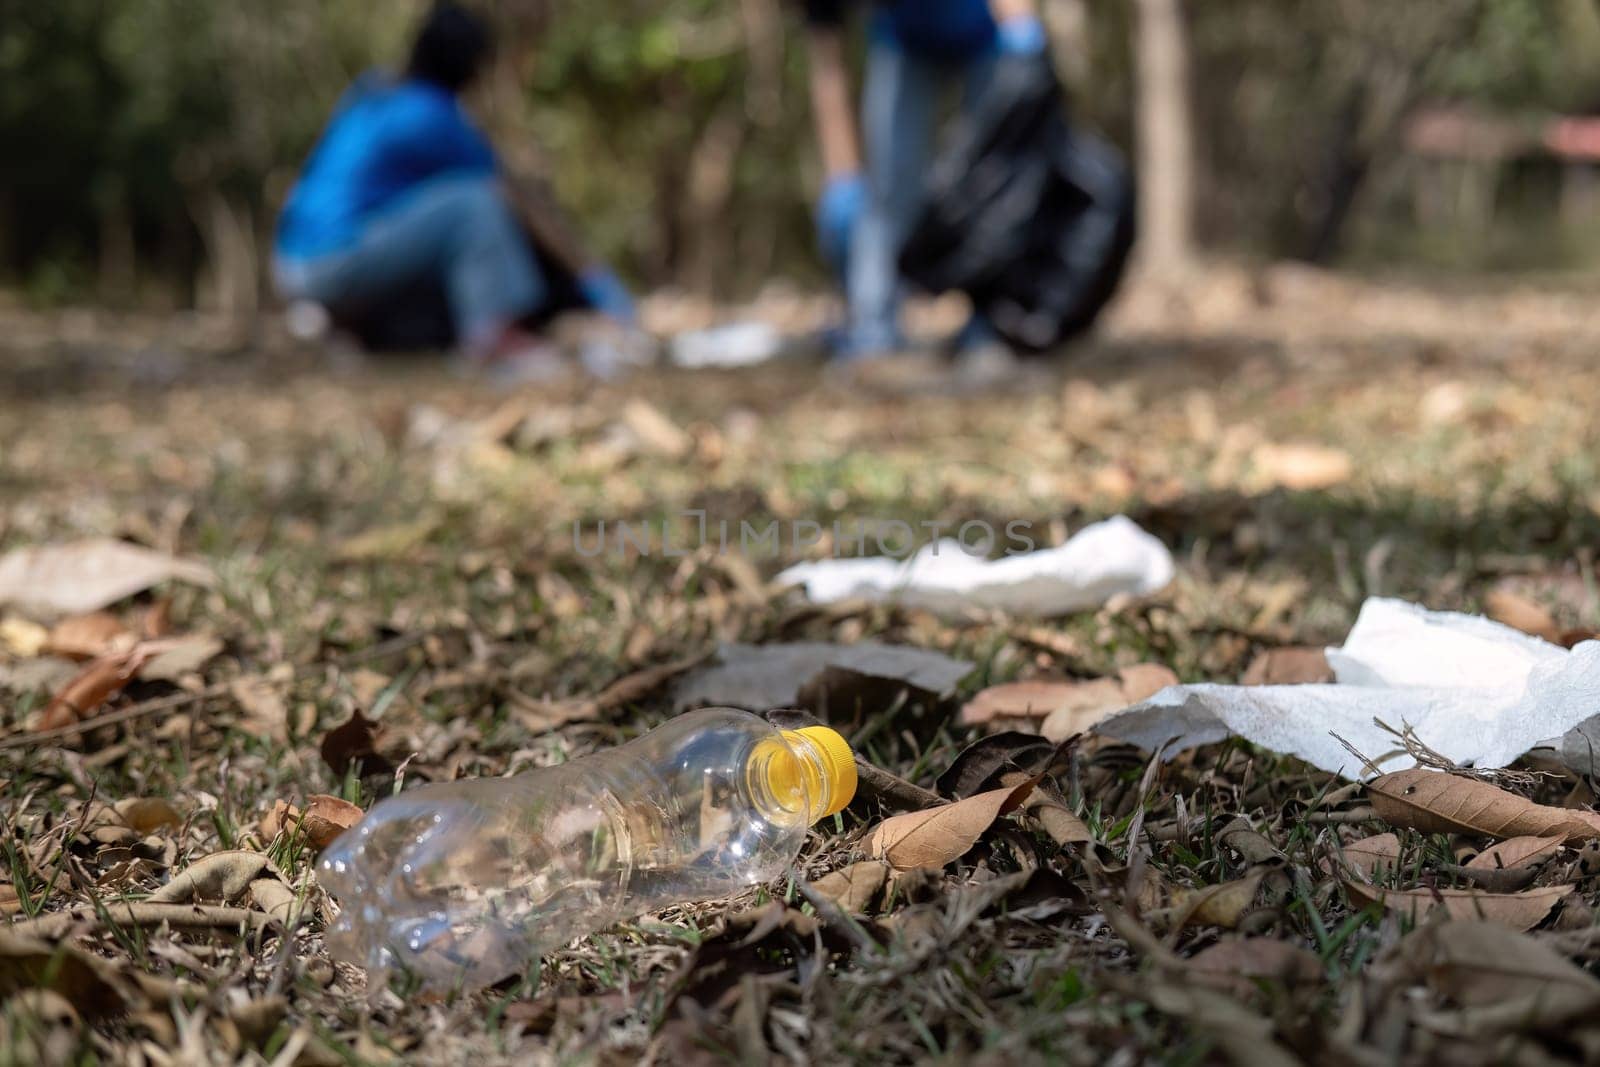 close up view, A group of Asian volunteers collects trash in plastic bags and cleaning areas in the forest to preserve the natural ecosystem. by wichayada